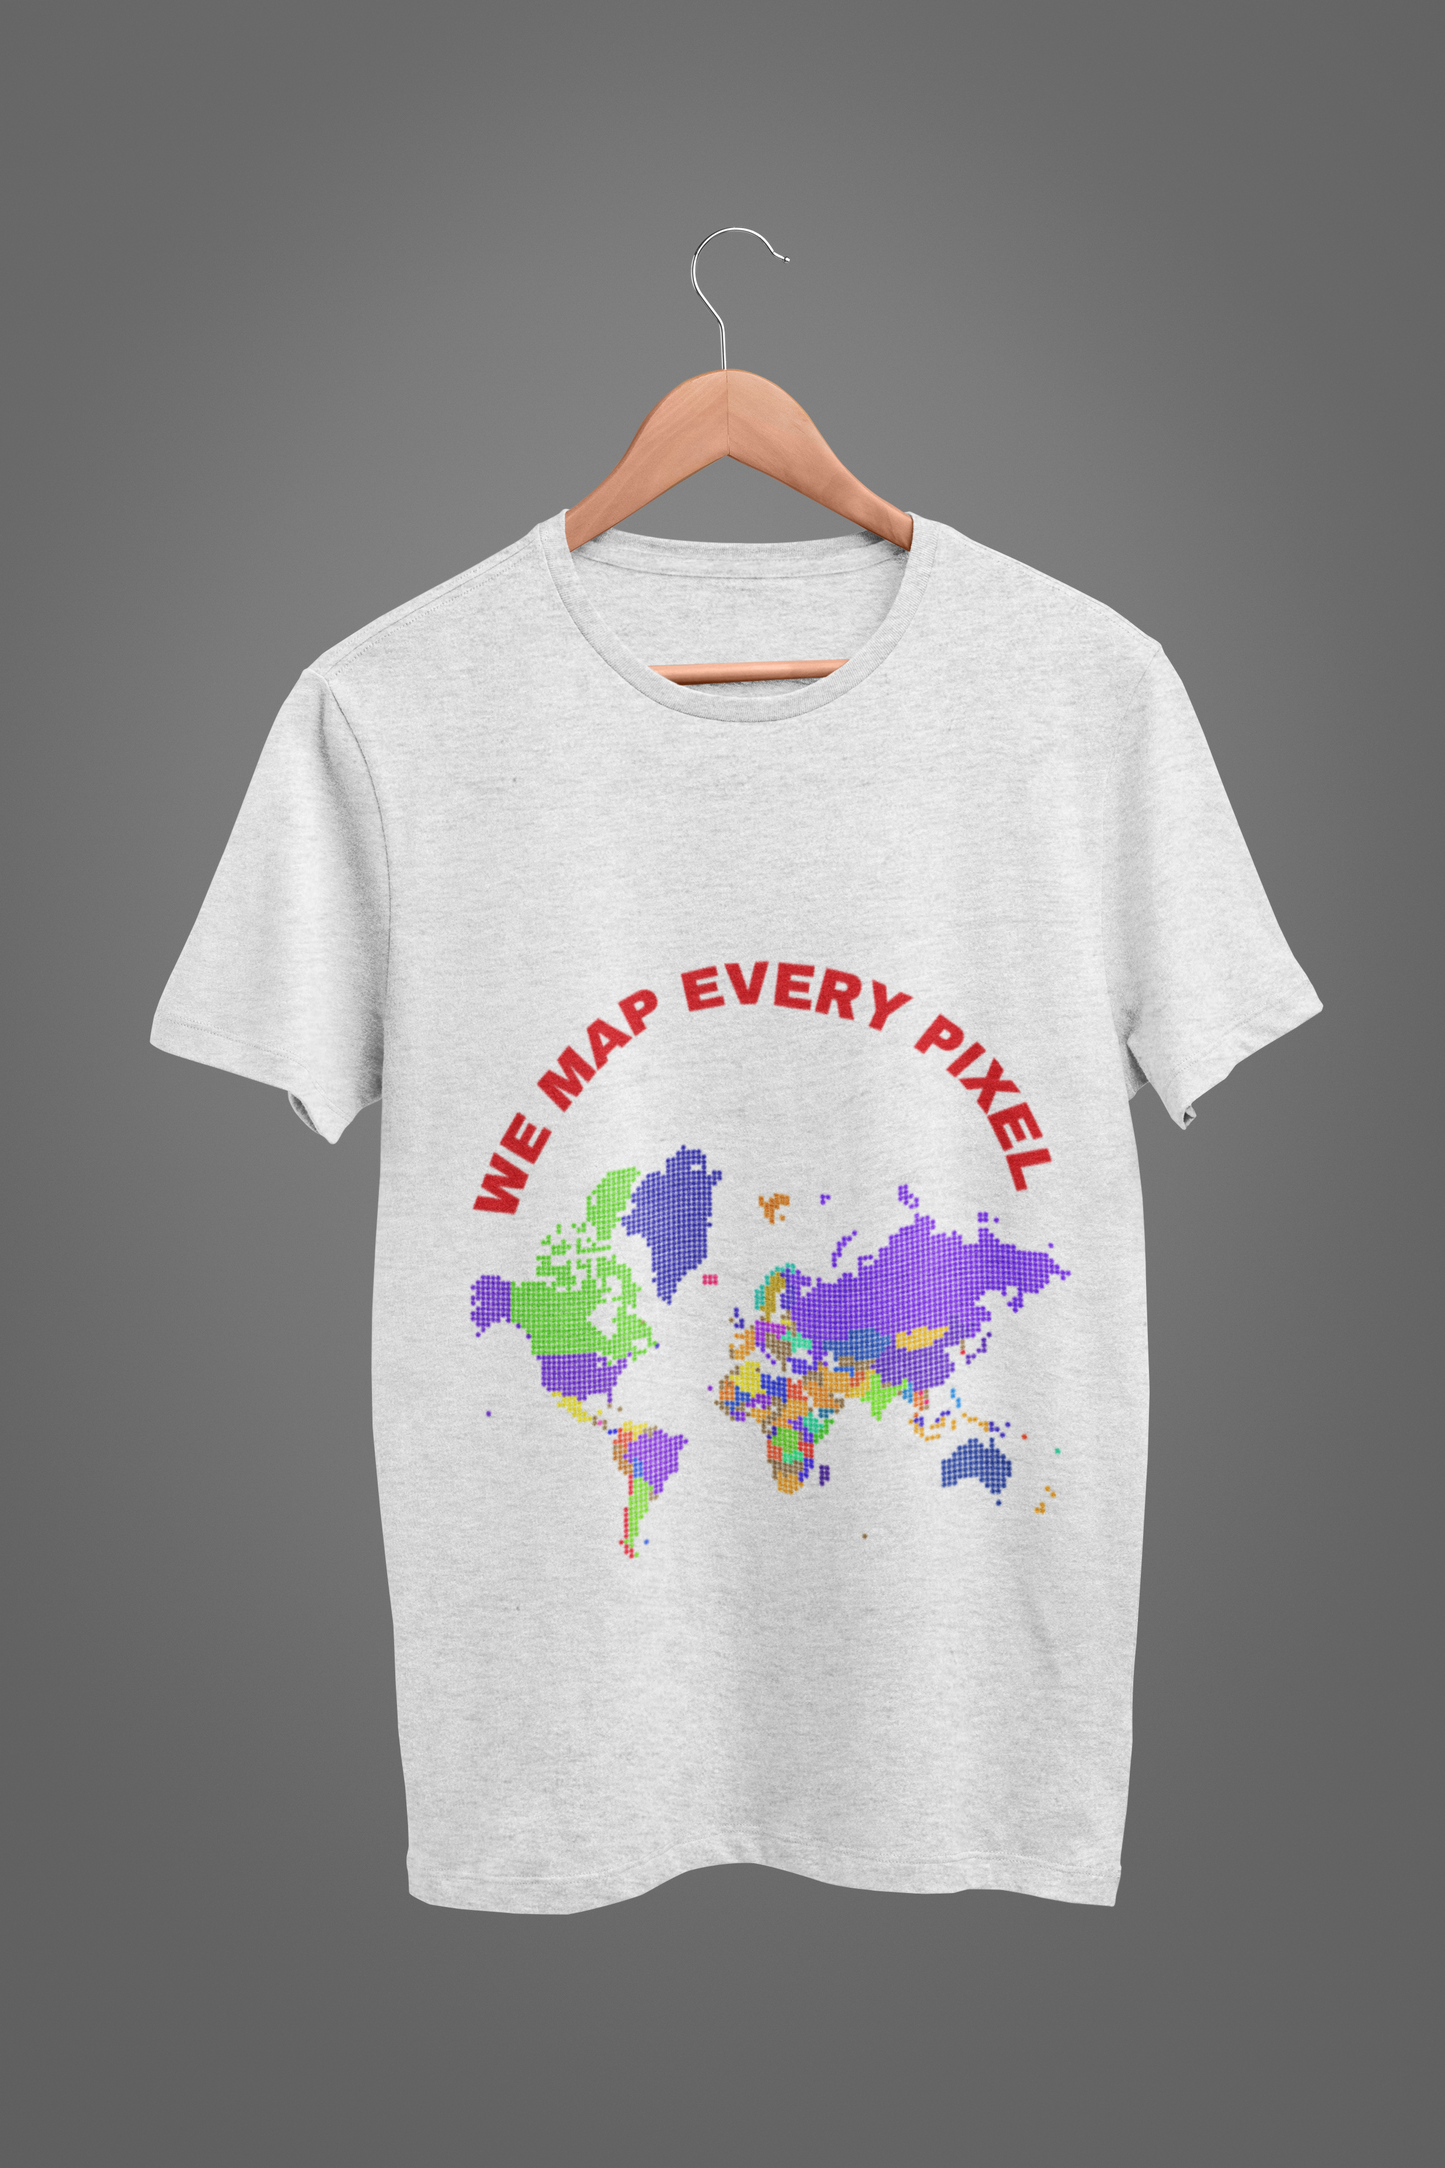 WE MAP EVERY PIXEL T SHIRT